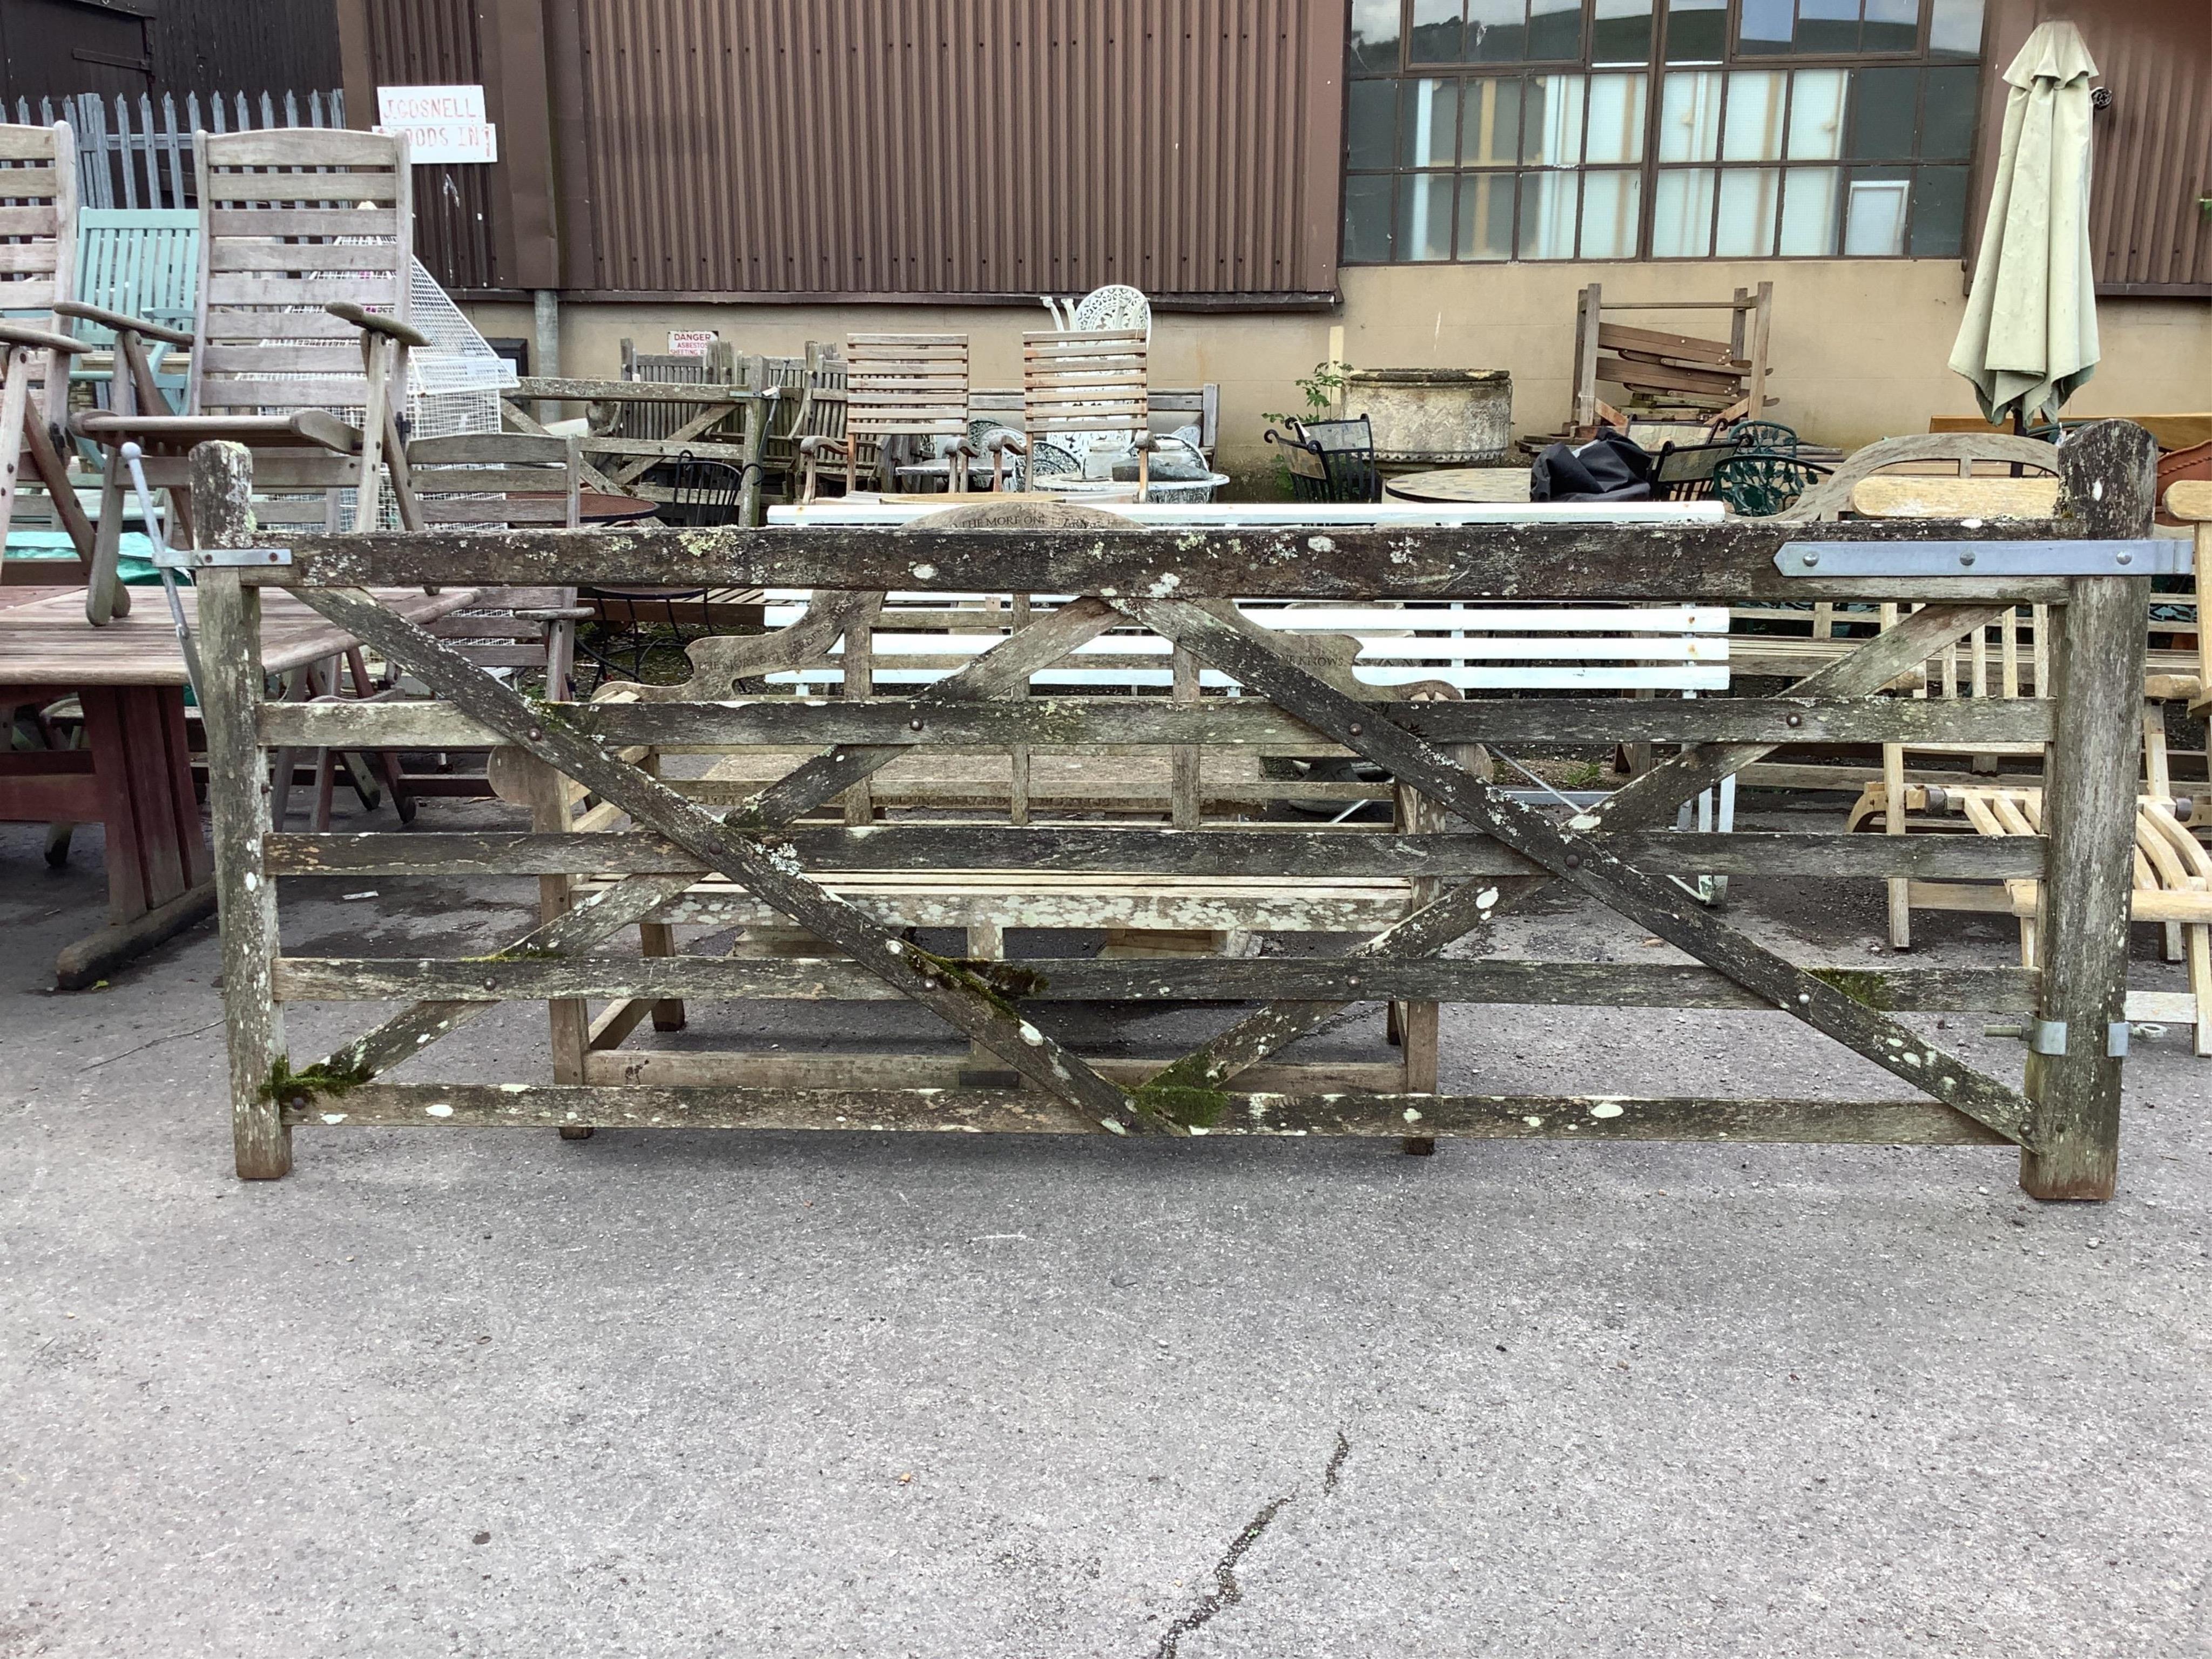 A pair of 10ft Biddenden hardwood gates with galvanised mounts. Condition - fair